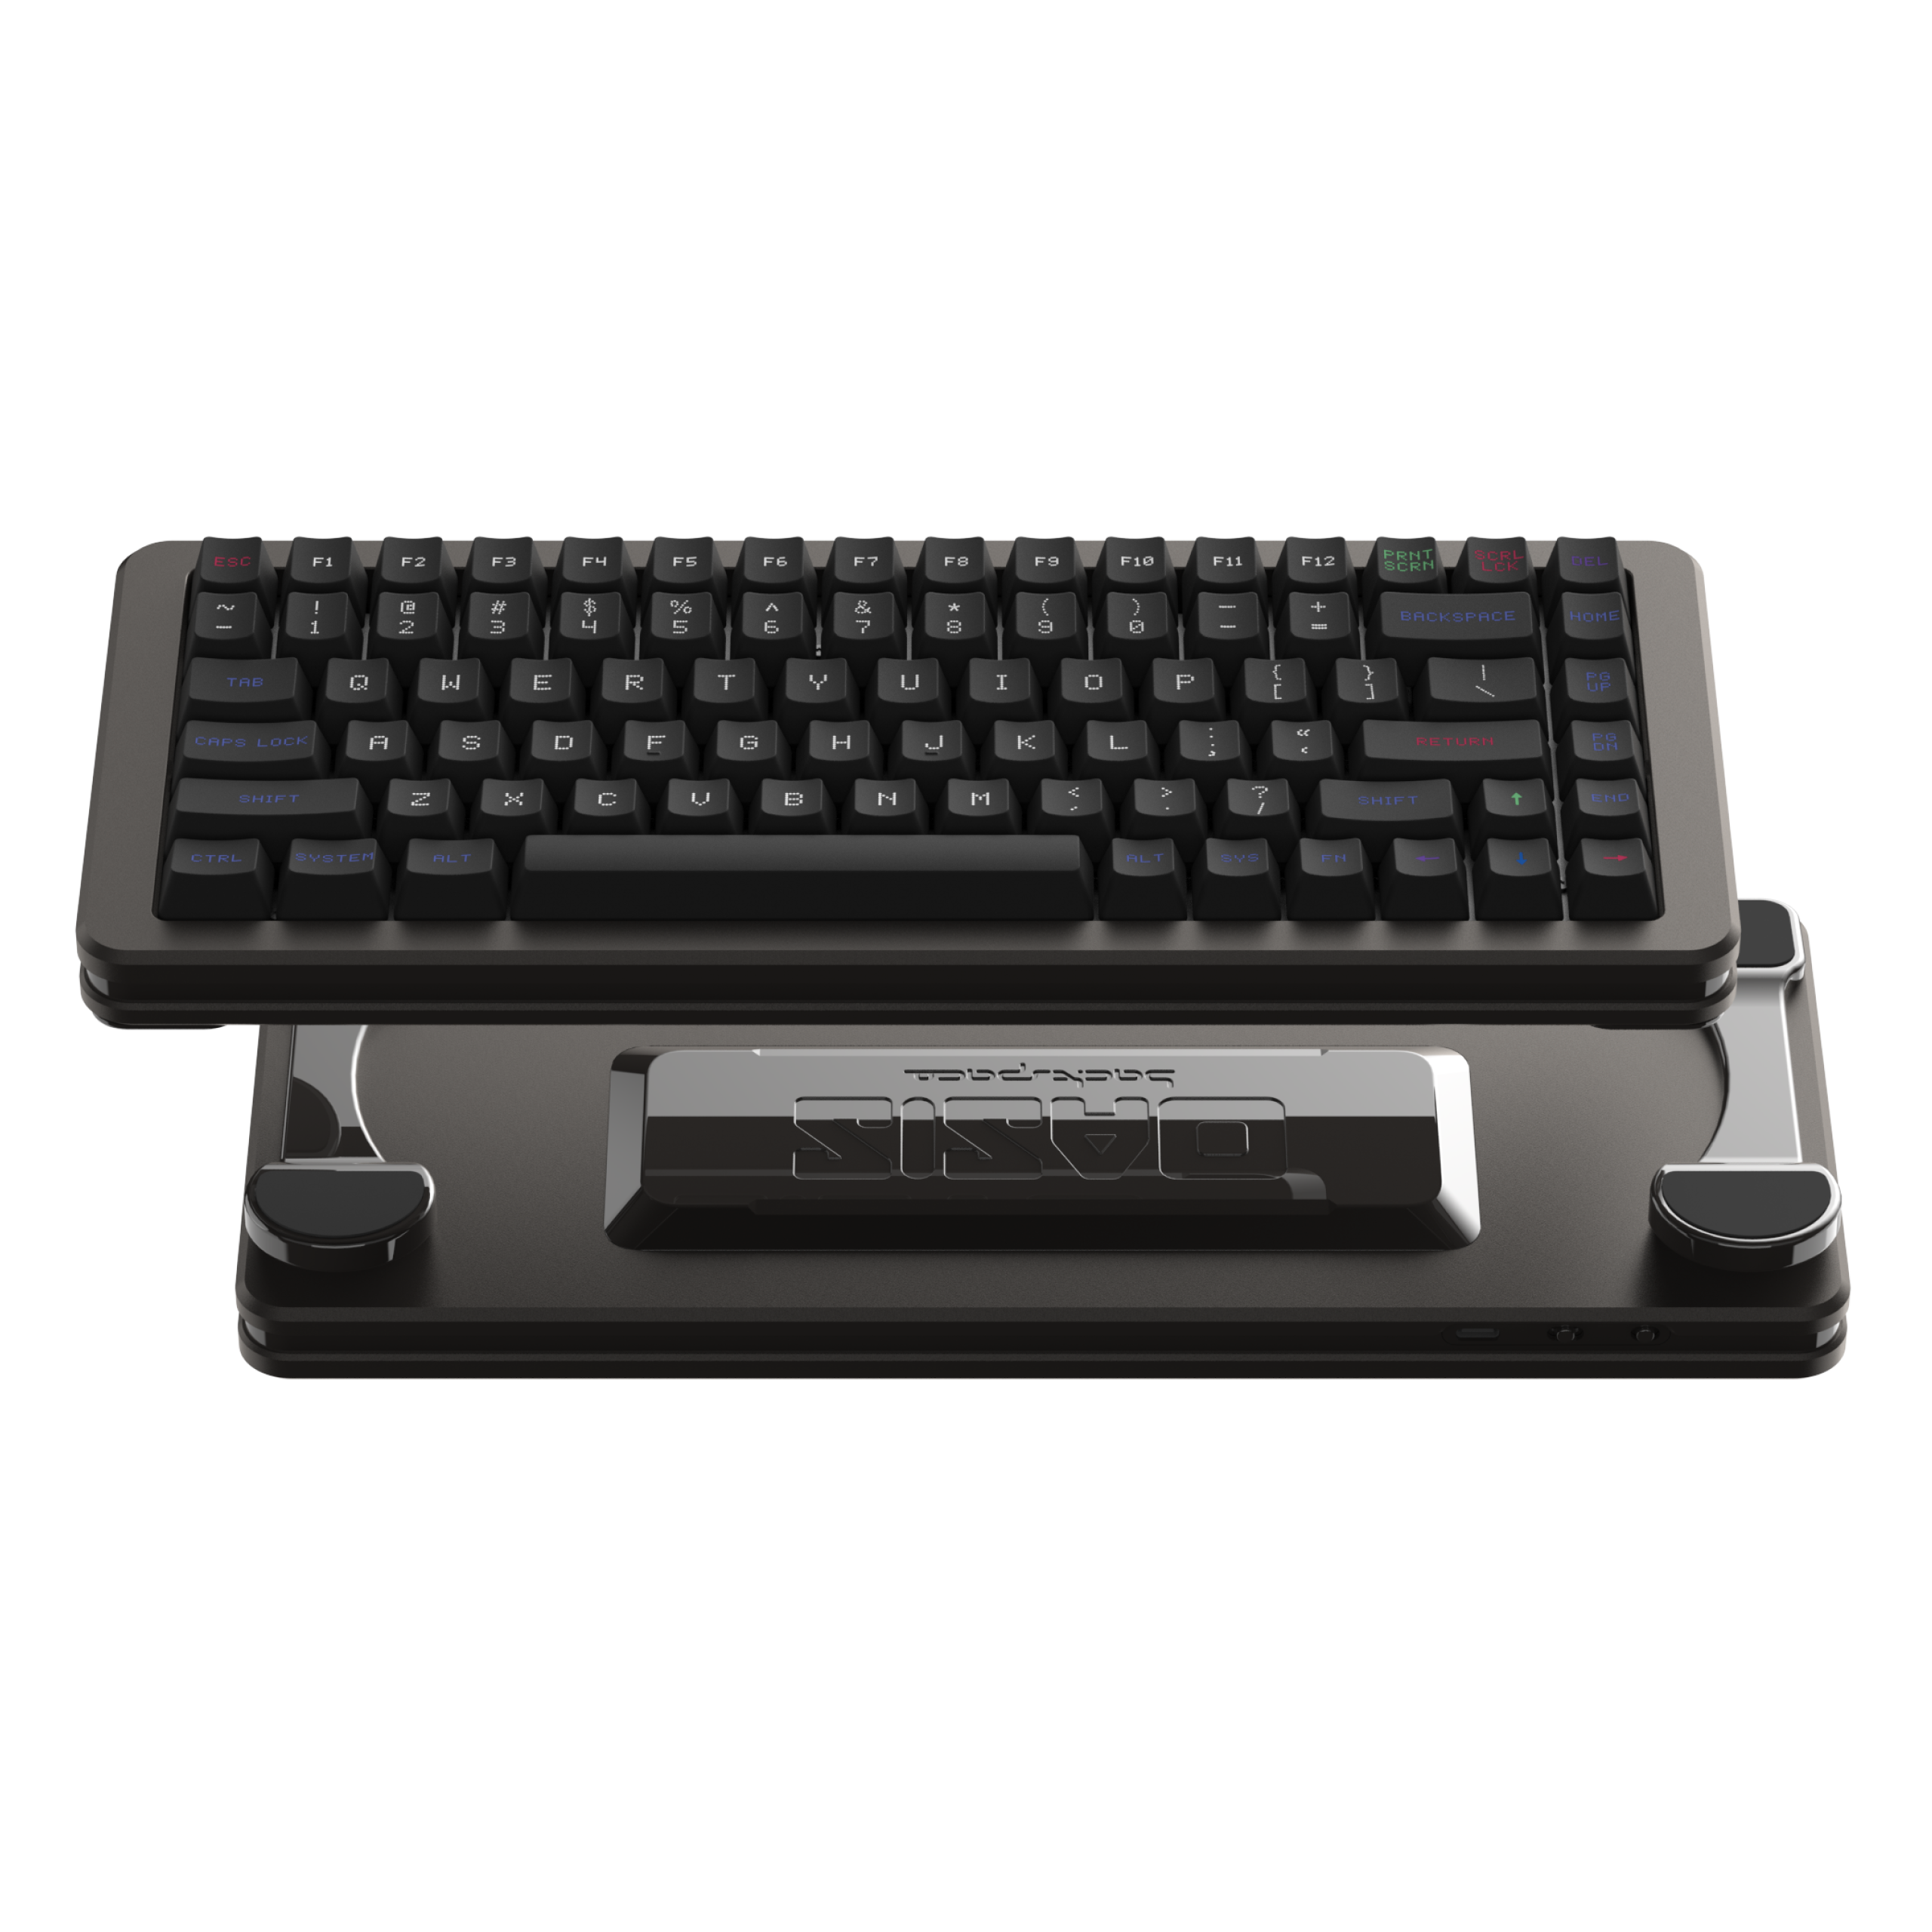 OASIS 75 Magnetic Switch Gaming Keyboard